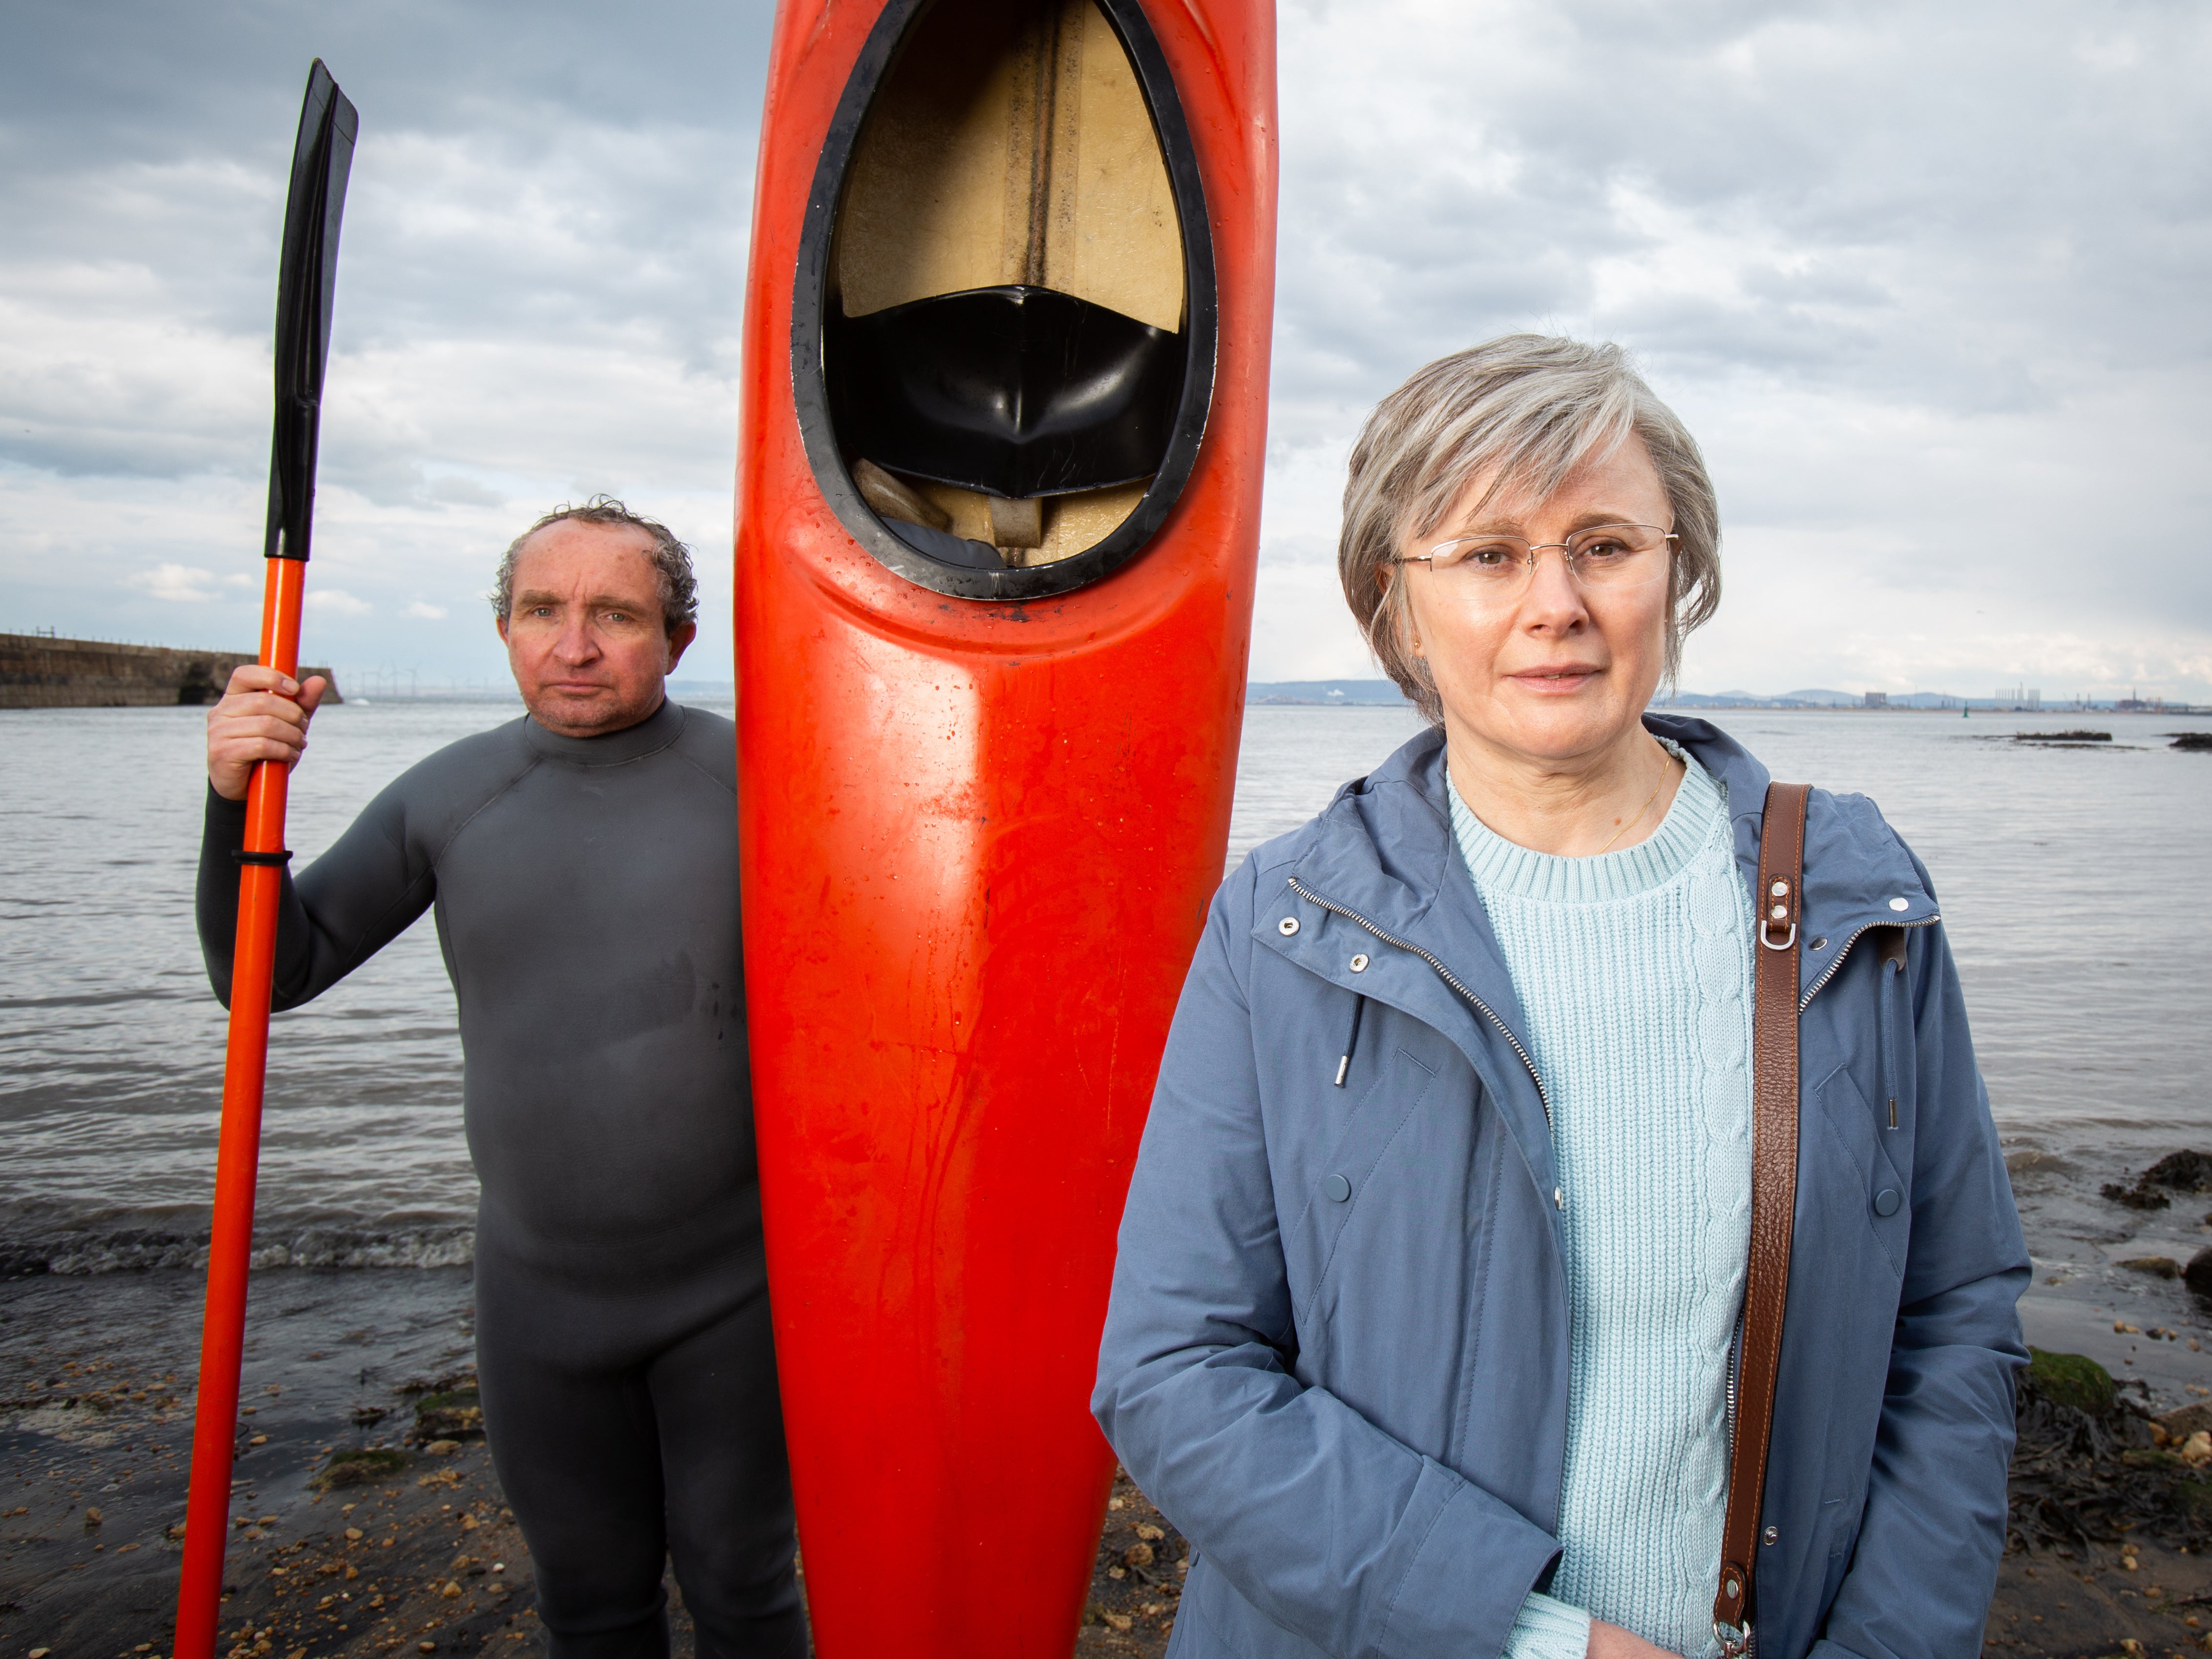 Eddie Marsan plays the canoe fraudster, with downtrodden wife Anne played by Monica Dolan